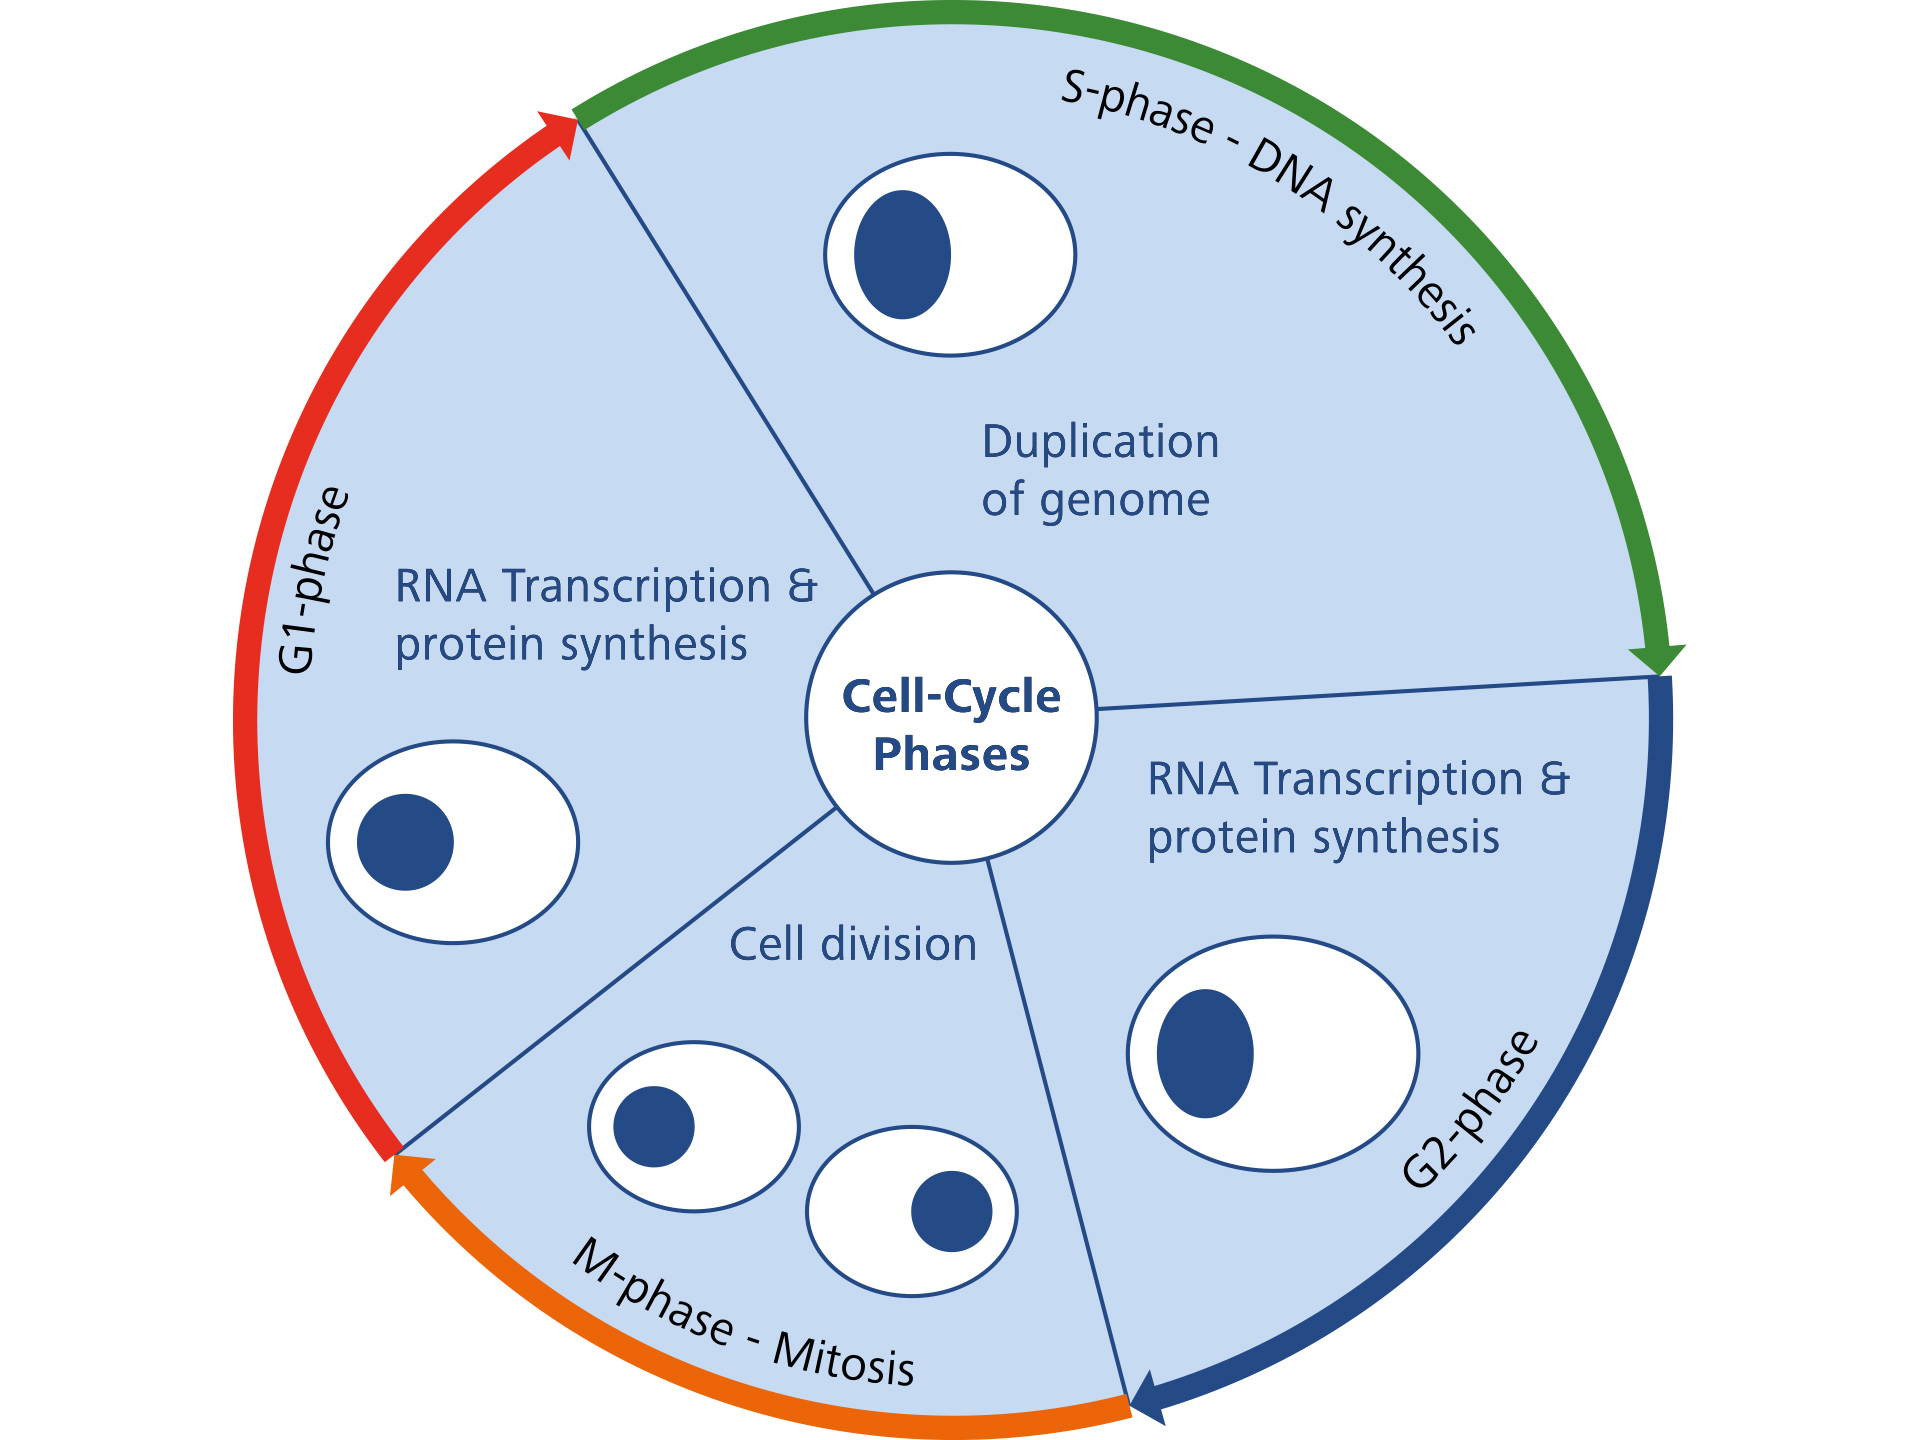 Figure 1A: Scheme of cell-cycle phases